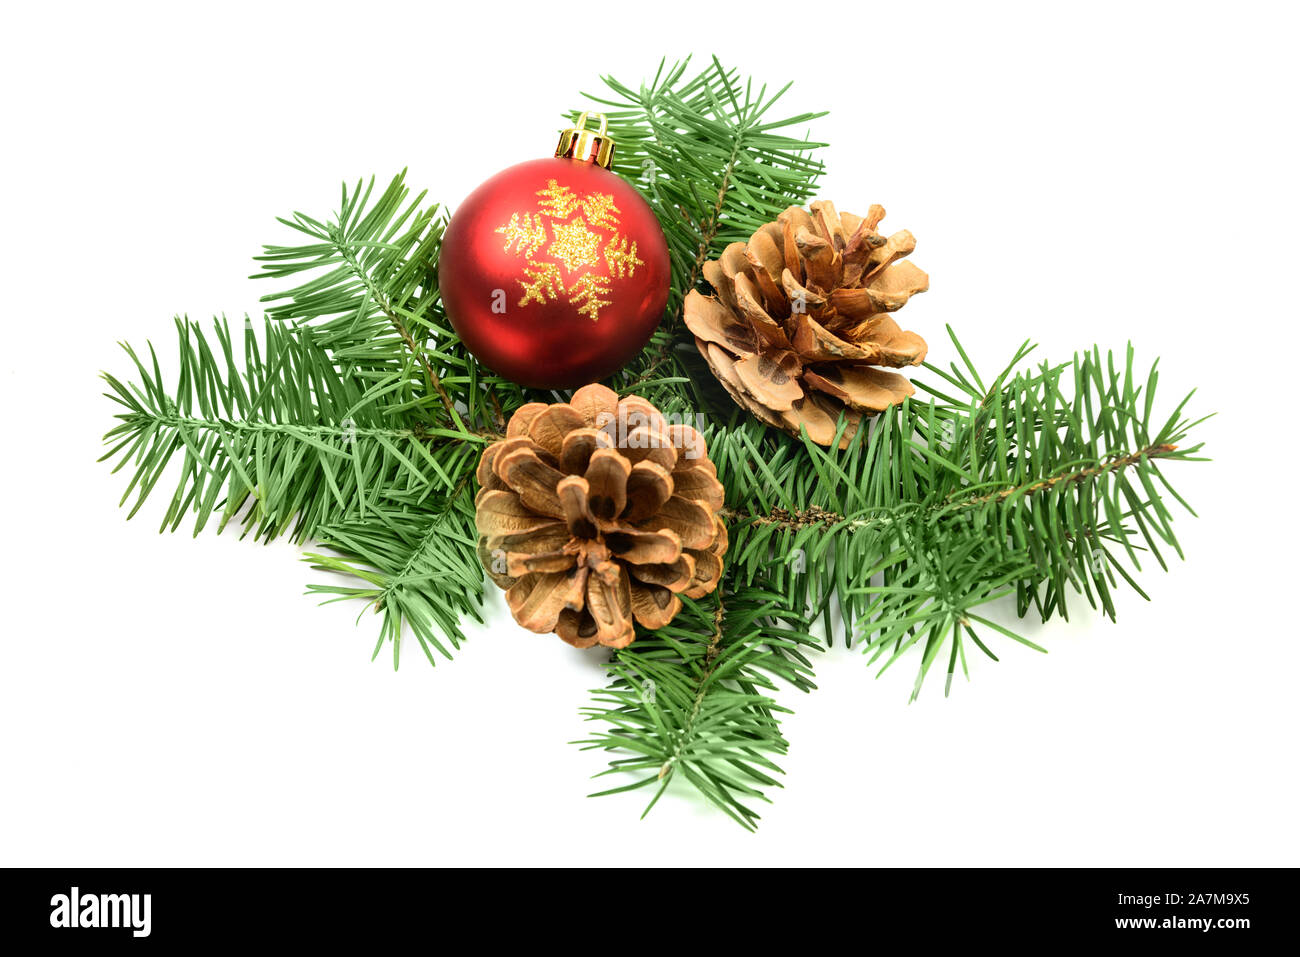 Pine cones with spruce tree branch and Christmas decoration ball on a white background Stock Photo